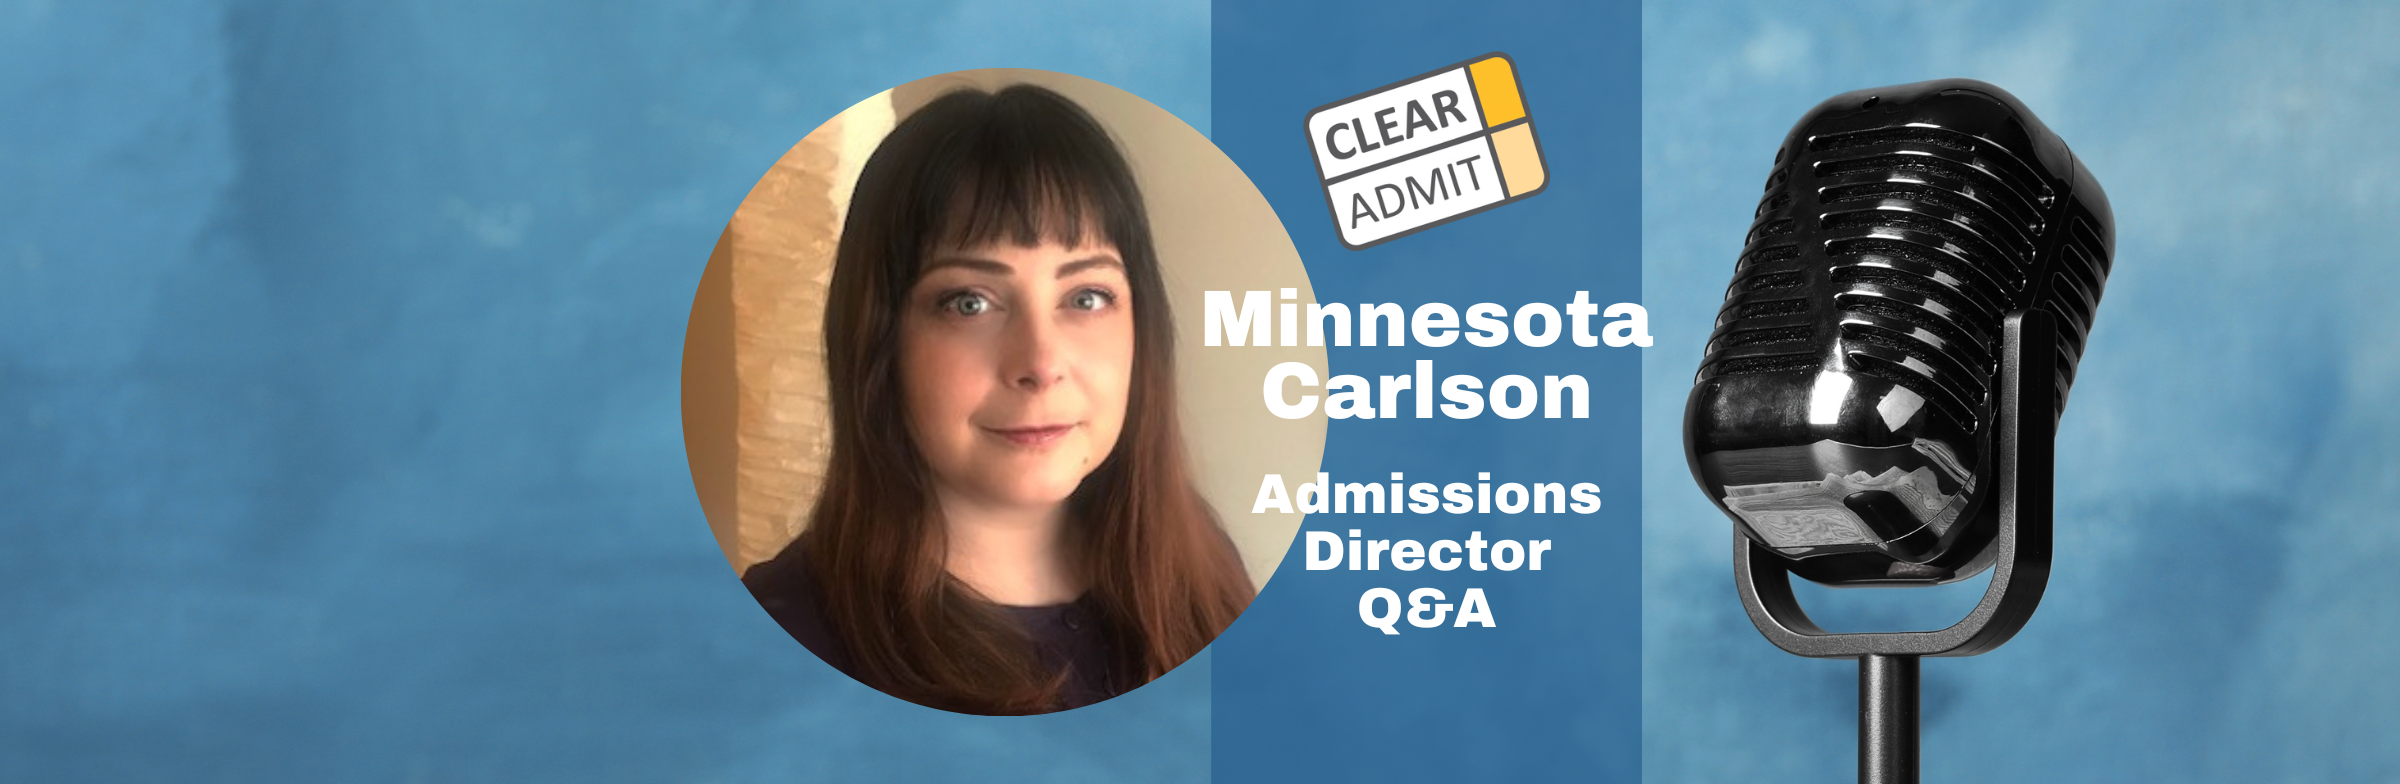 Image for Admissions Director Q&A: Betsy Ryan of the Minnesota Carlson School of Management